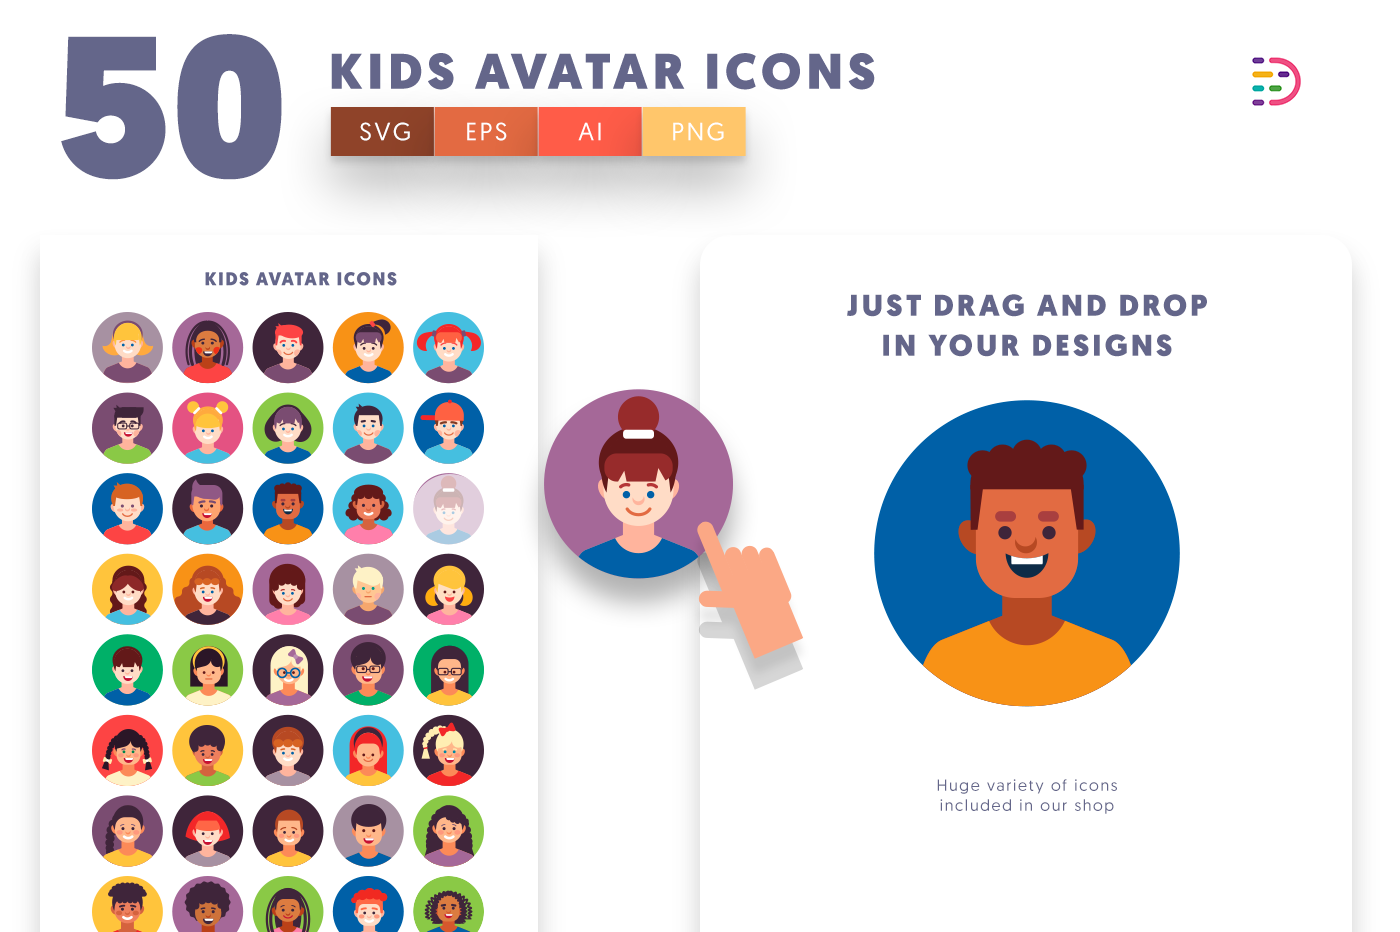  Kids Avatar Icons with colored backgrounds